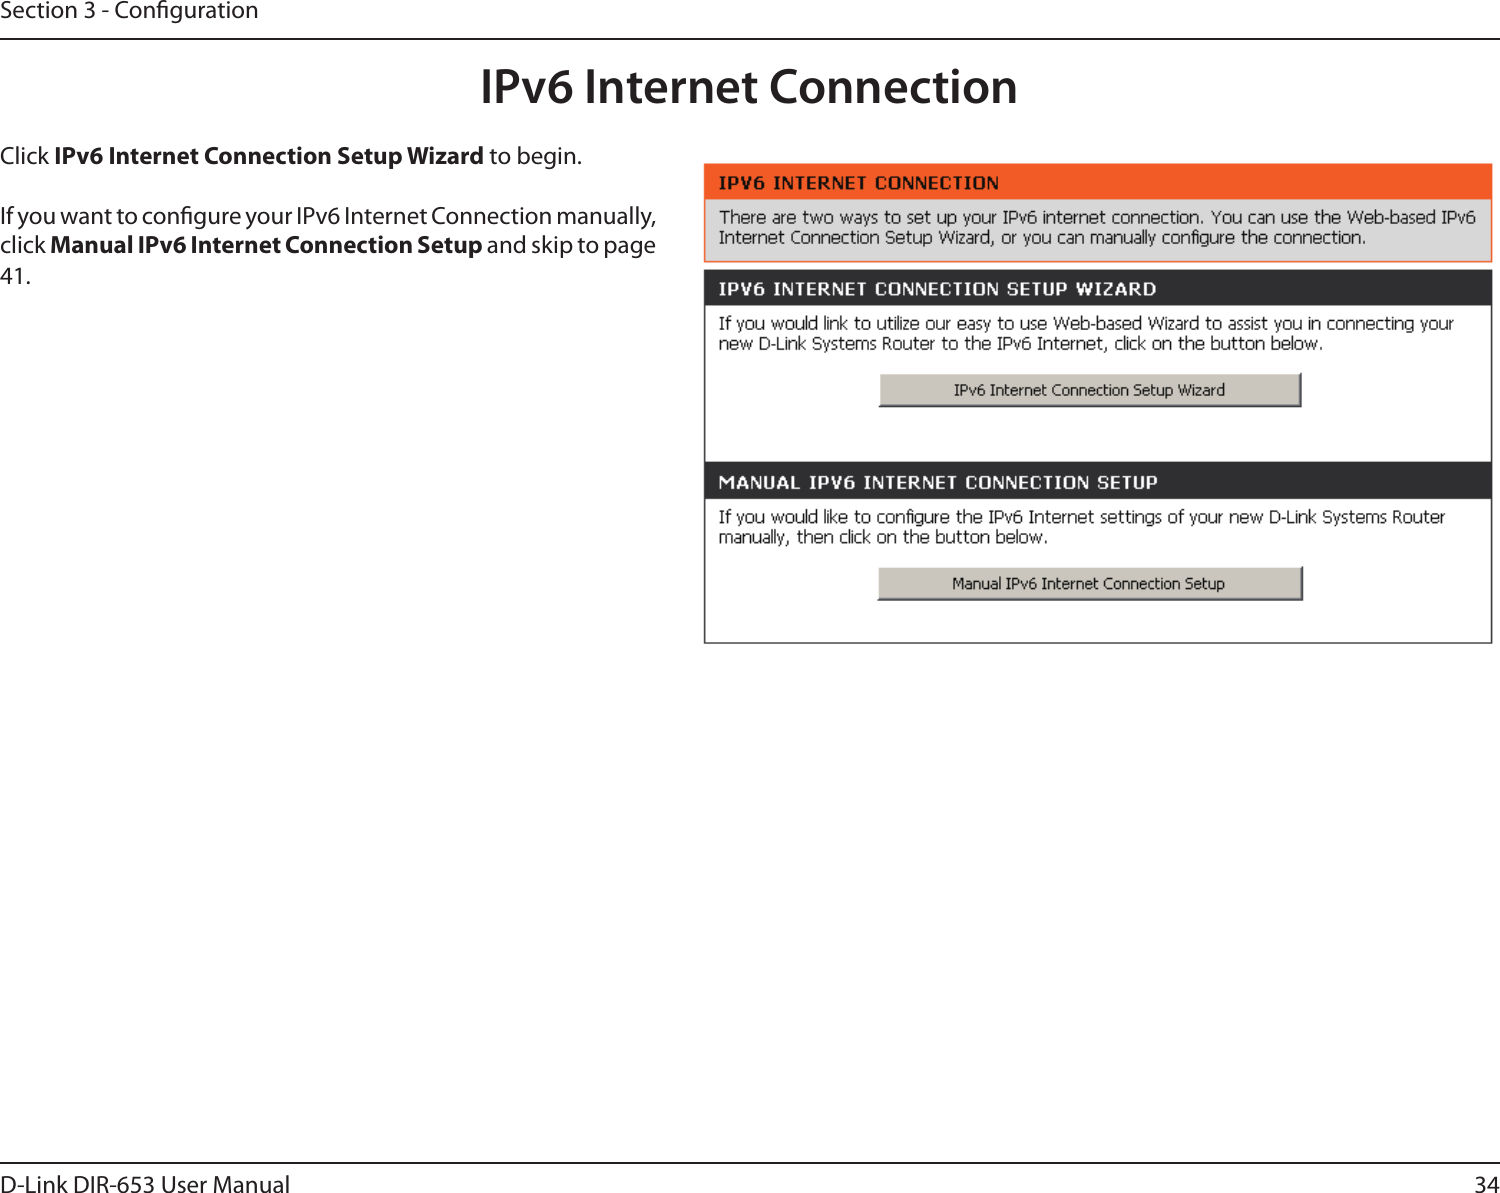 34D-Link DIR-653 User ManualSection 3 - CongurationIPv6 Internet ConnectionClick IPv6 Internet Connection Setup Wizard to begin. If you want to congure your IPv6 Internet Connection manually, click Manual IPv6 Internet Connection Setup and skip to page 41.